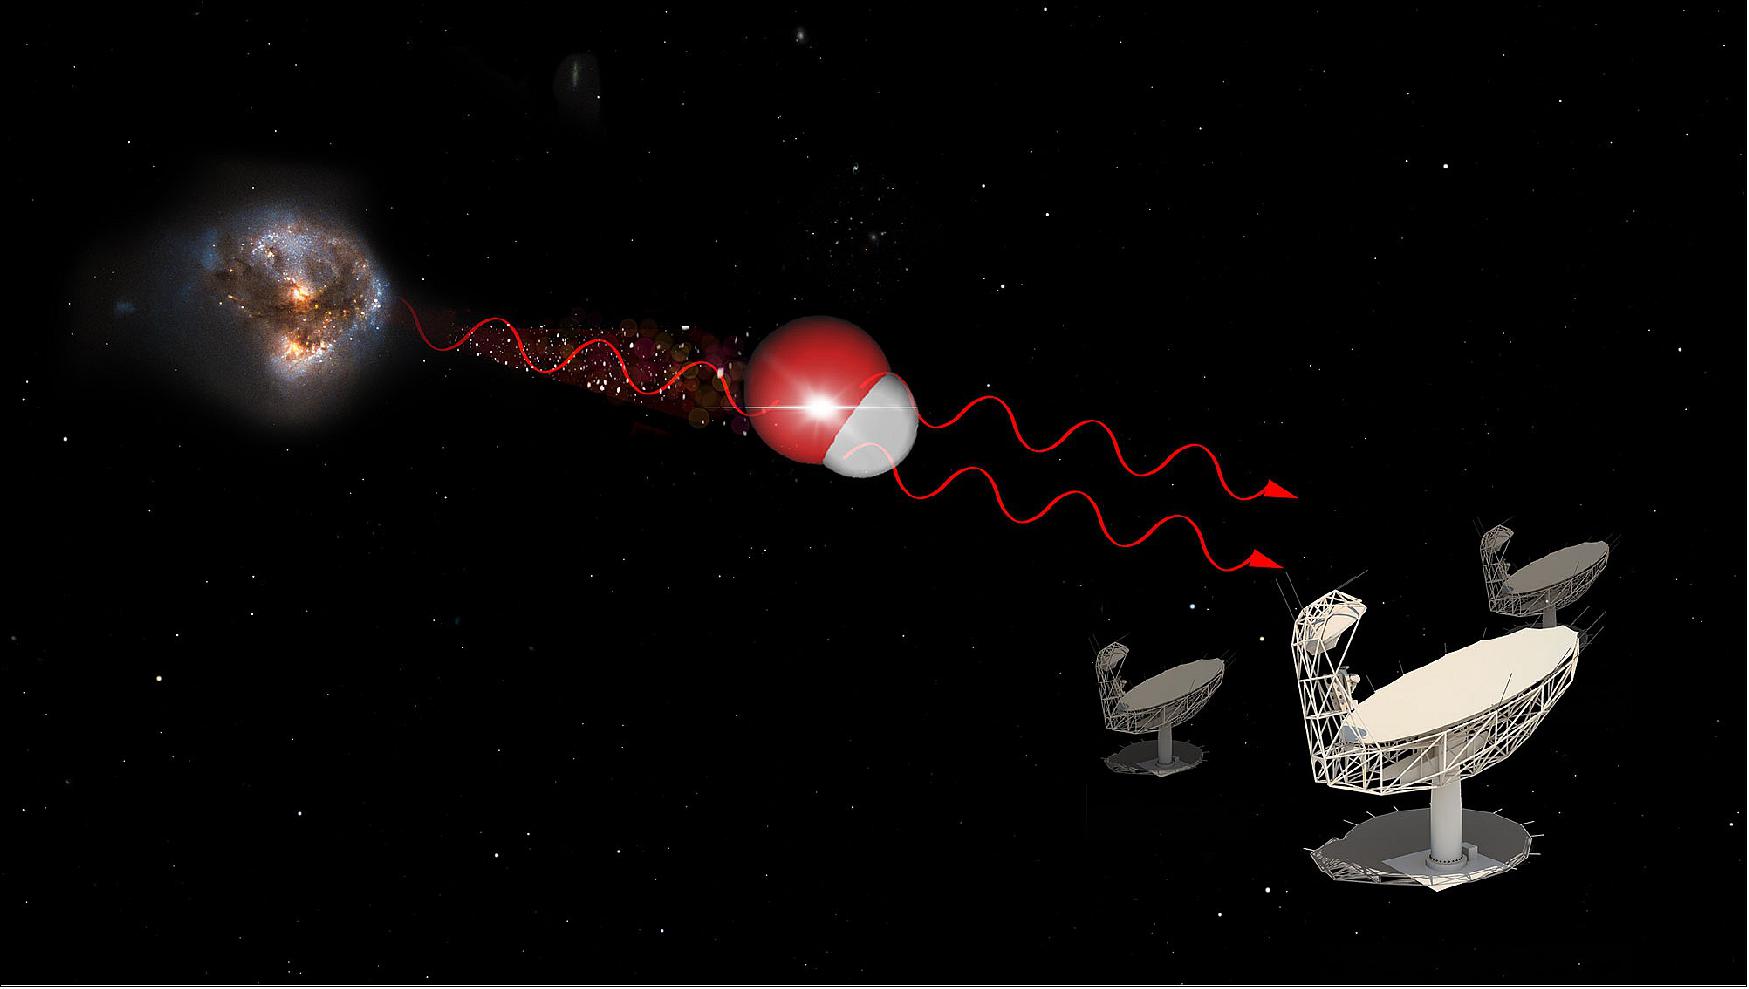 Figure 65: Artist’s impression of a hydroxyl maser. Inside a galaxy merger are hydroxyl molecules, composed of one atom of hydrogen and one atom of oxygen. When one molecule absorbs a photon at 18 cm wavelength, it emits two photons of the same wavelength. When molecular gas is very dense, typically when two galaxies merge, this emission gets very bright and can be detected by radio telescopes such as the MeerKAT. © (image credit: IDIA/LADUMA using data from NASA/StSci/SKAO/MolView)